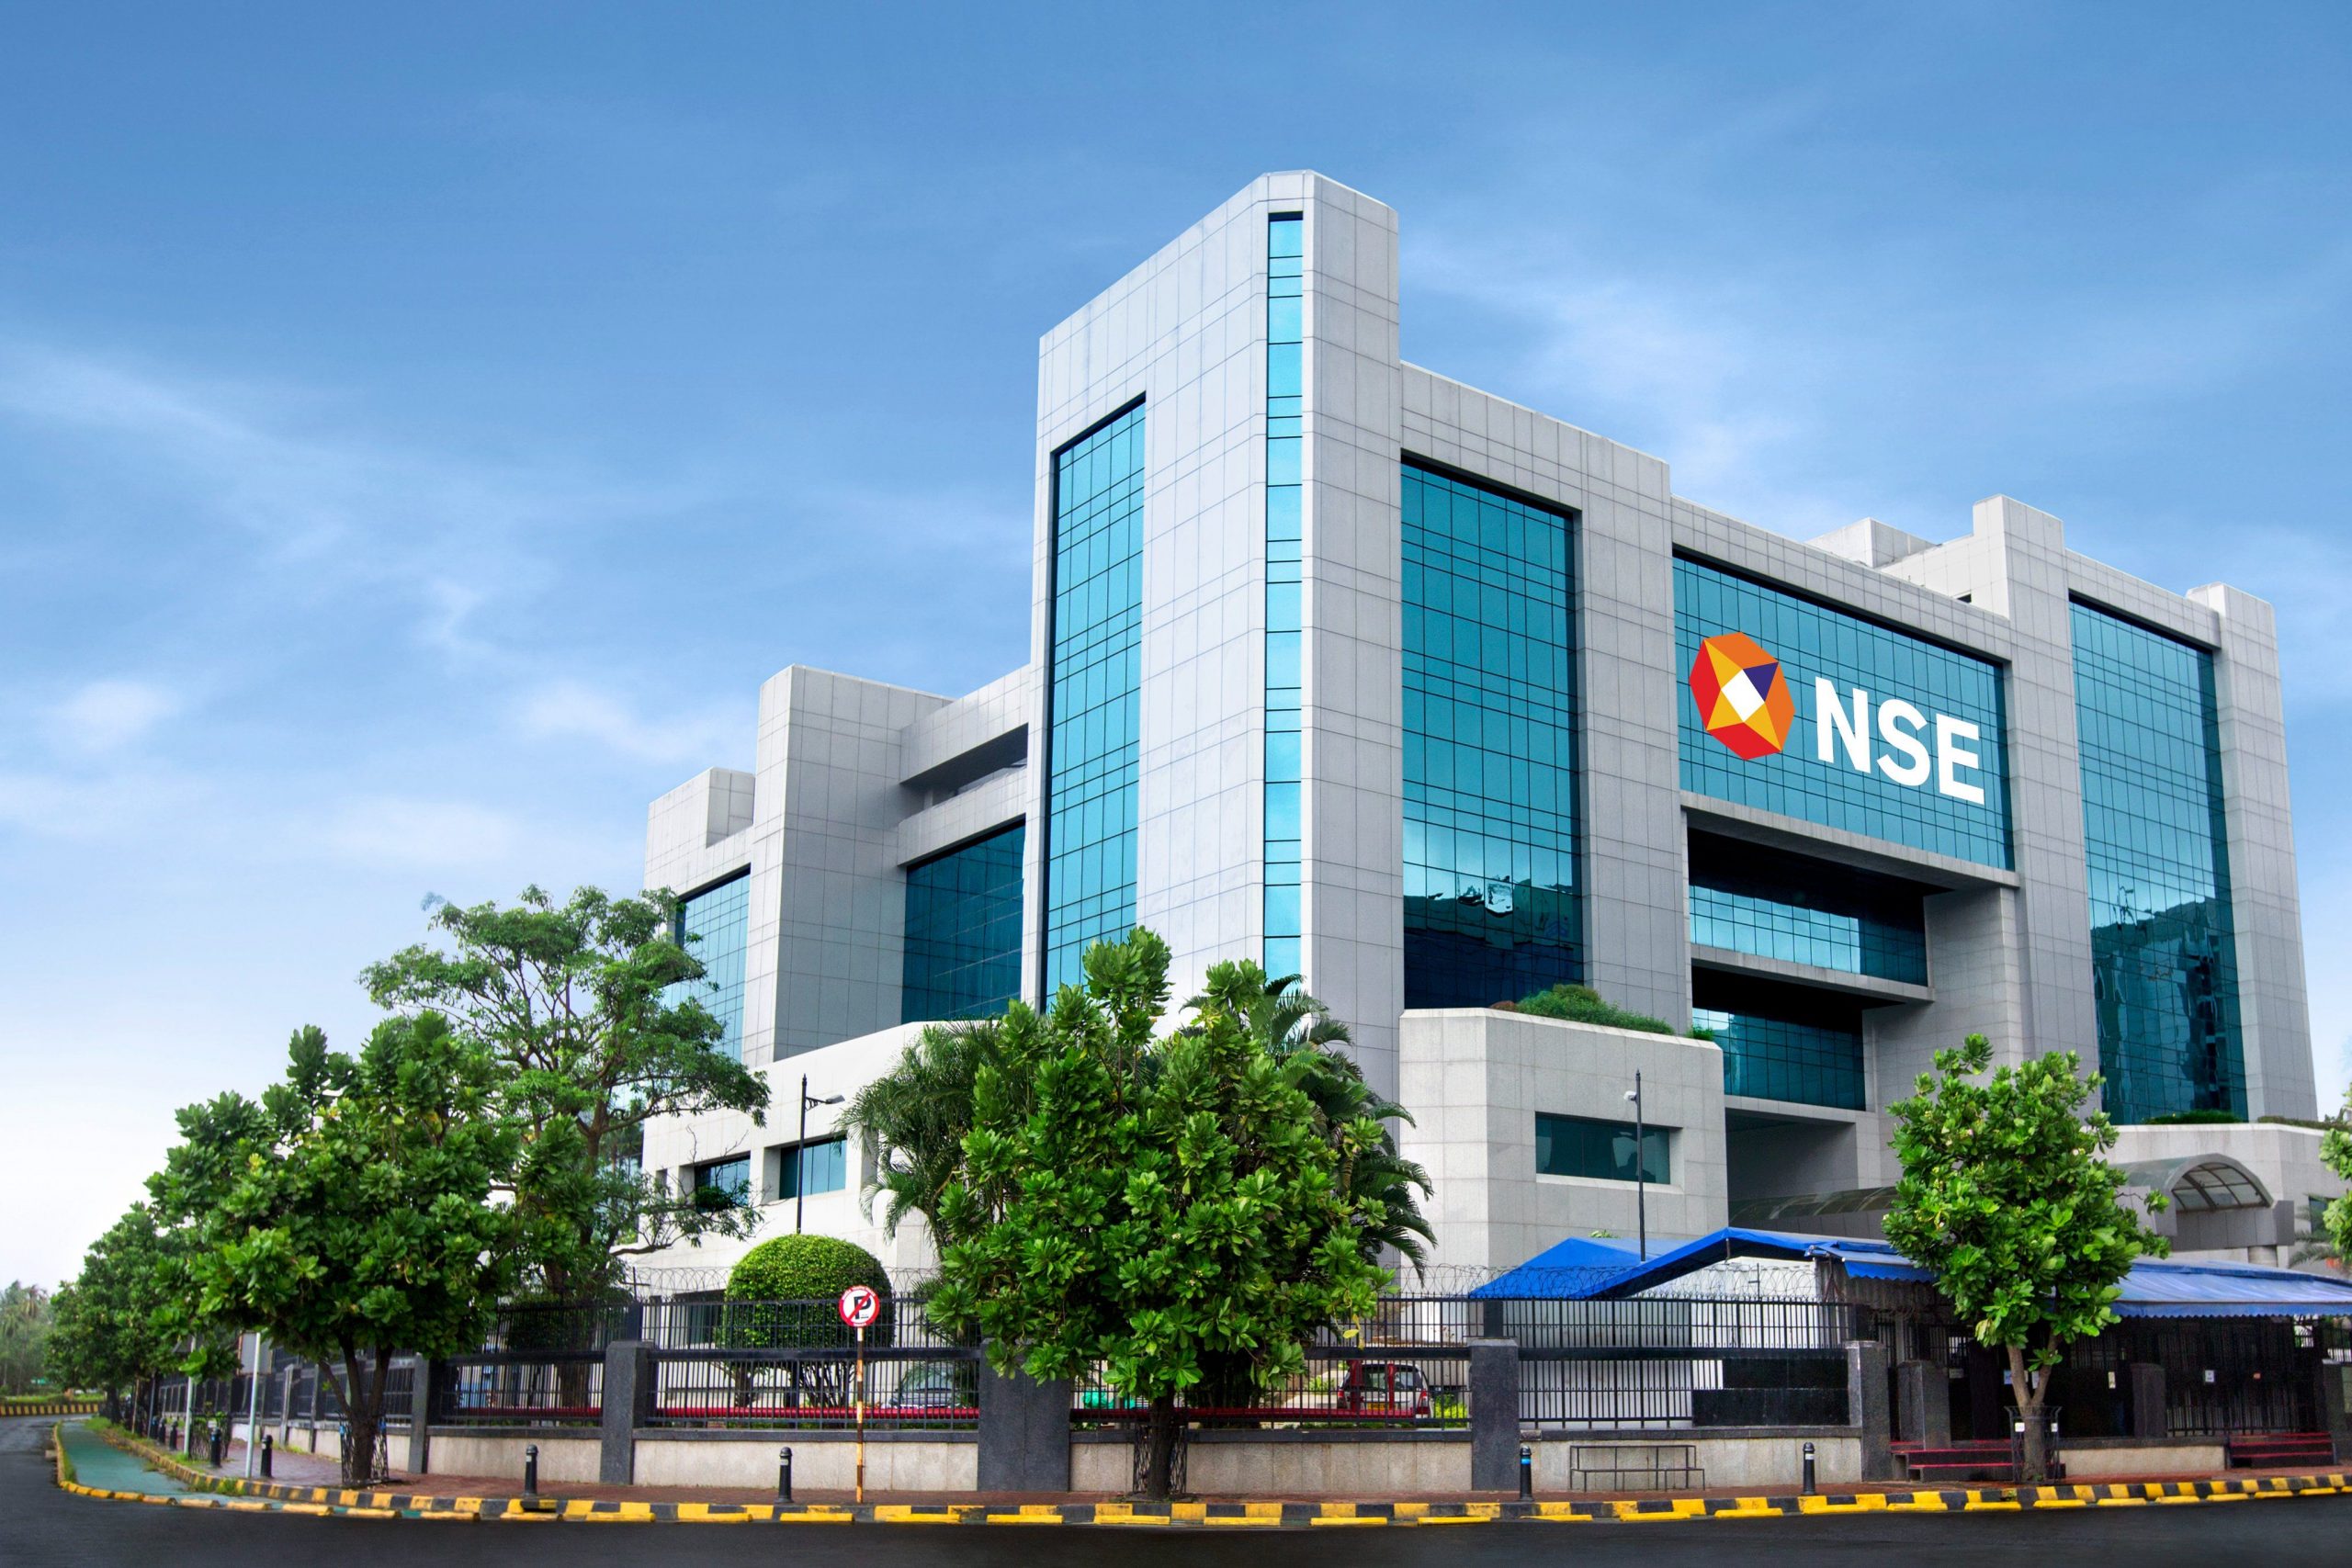 NSE F&O Ban: IDEA, Indiabulls, IRCTC, PNB and others under ban today